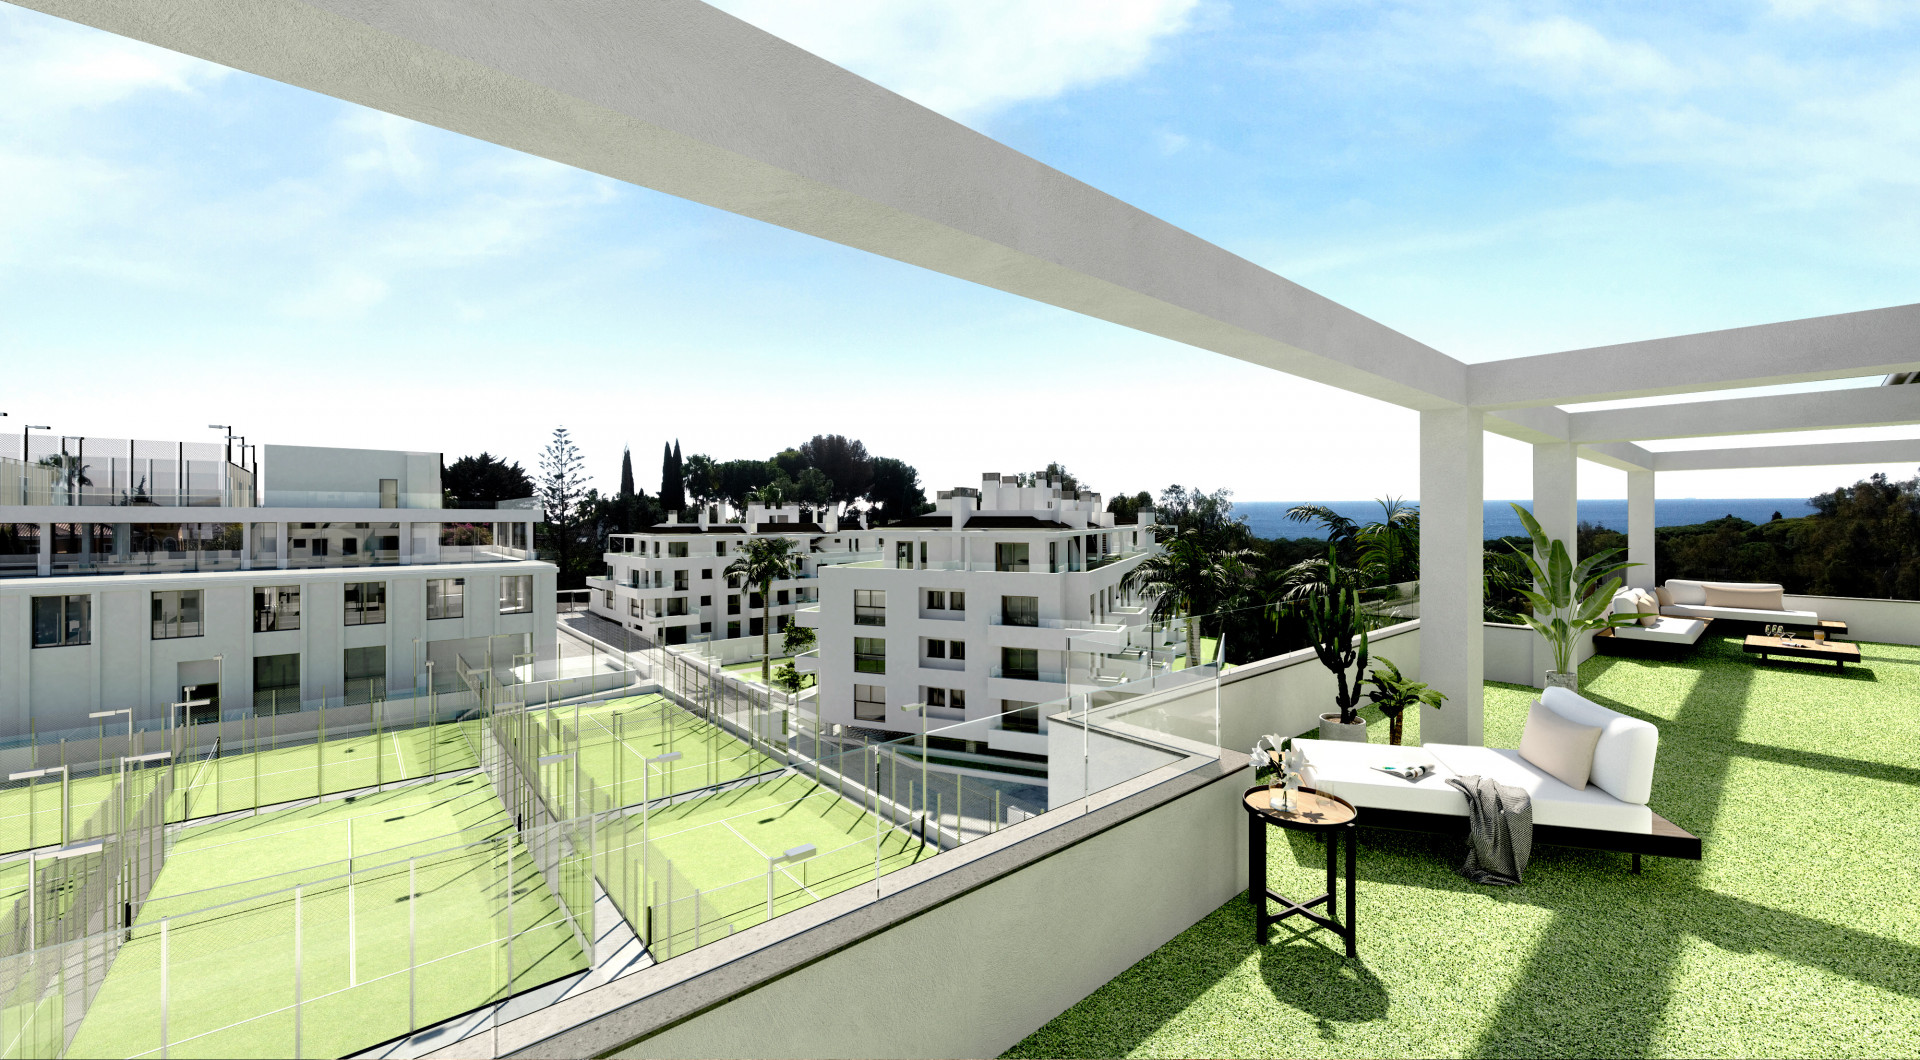 New project of modern apartments for in Calahonda